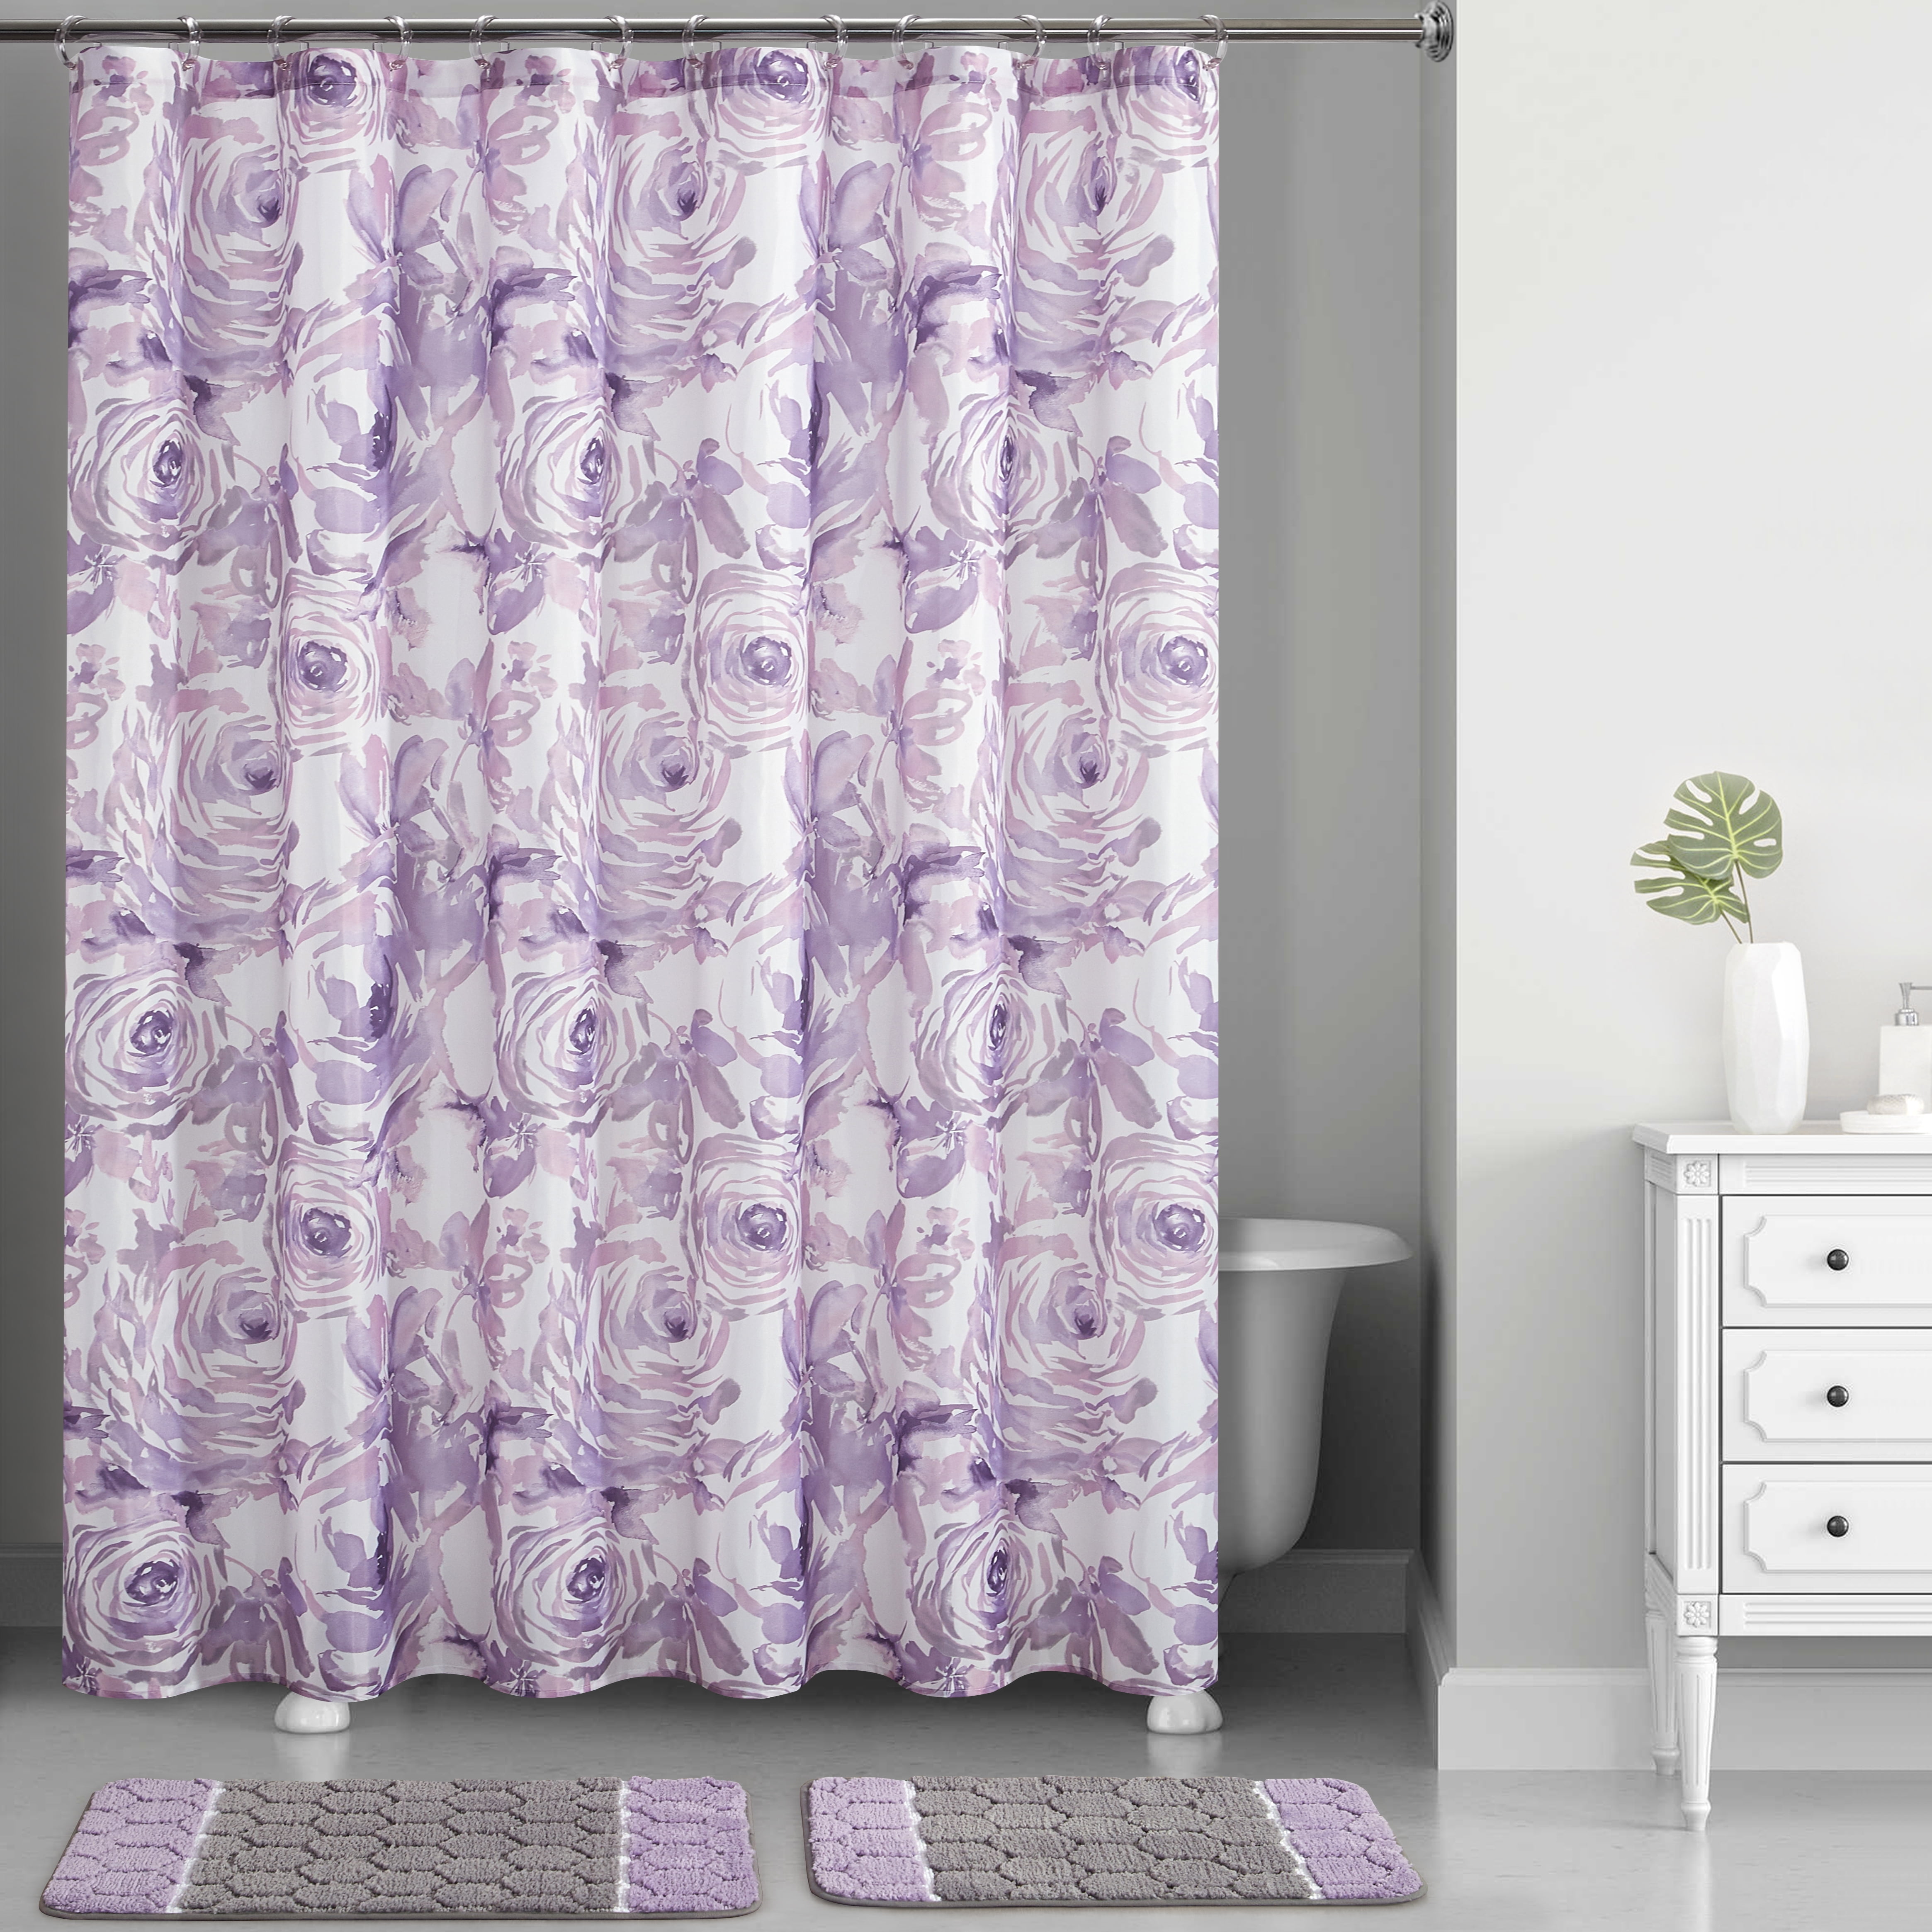 Mainstays Lavender Fl Watercolor, Shower Curtain And Window Curtain Set